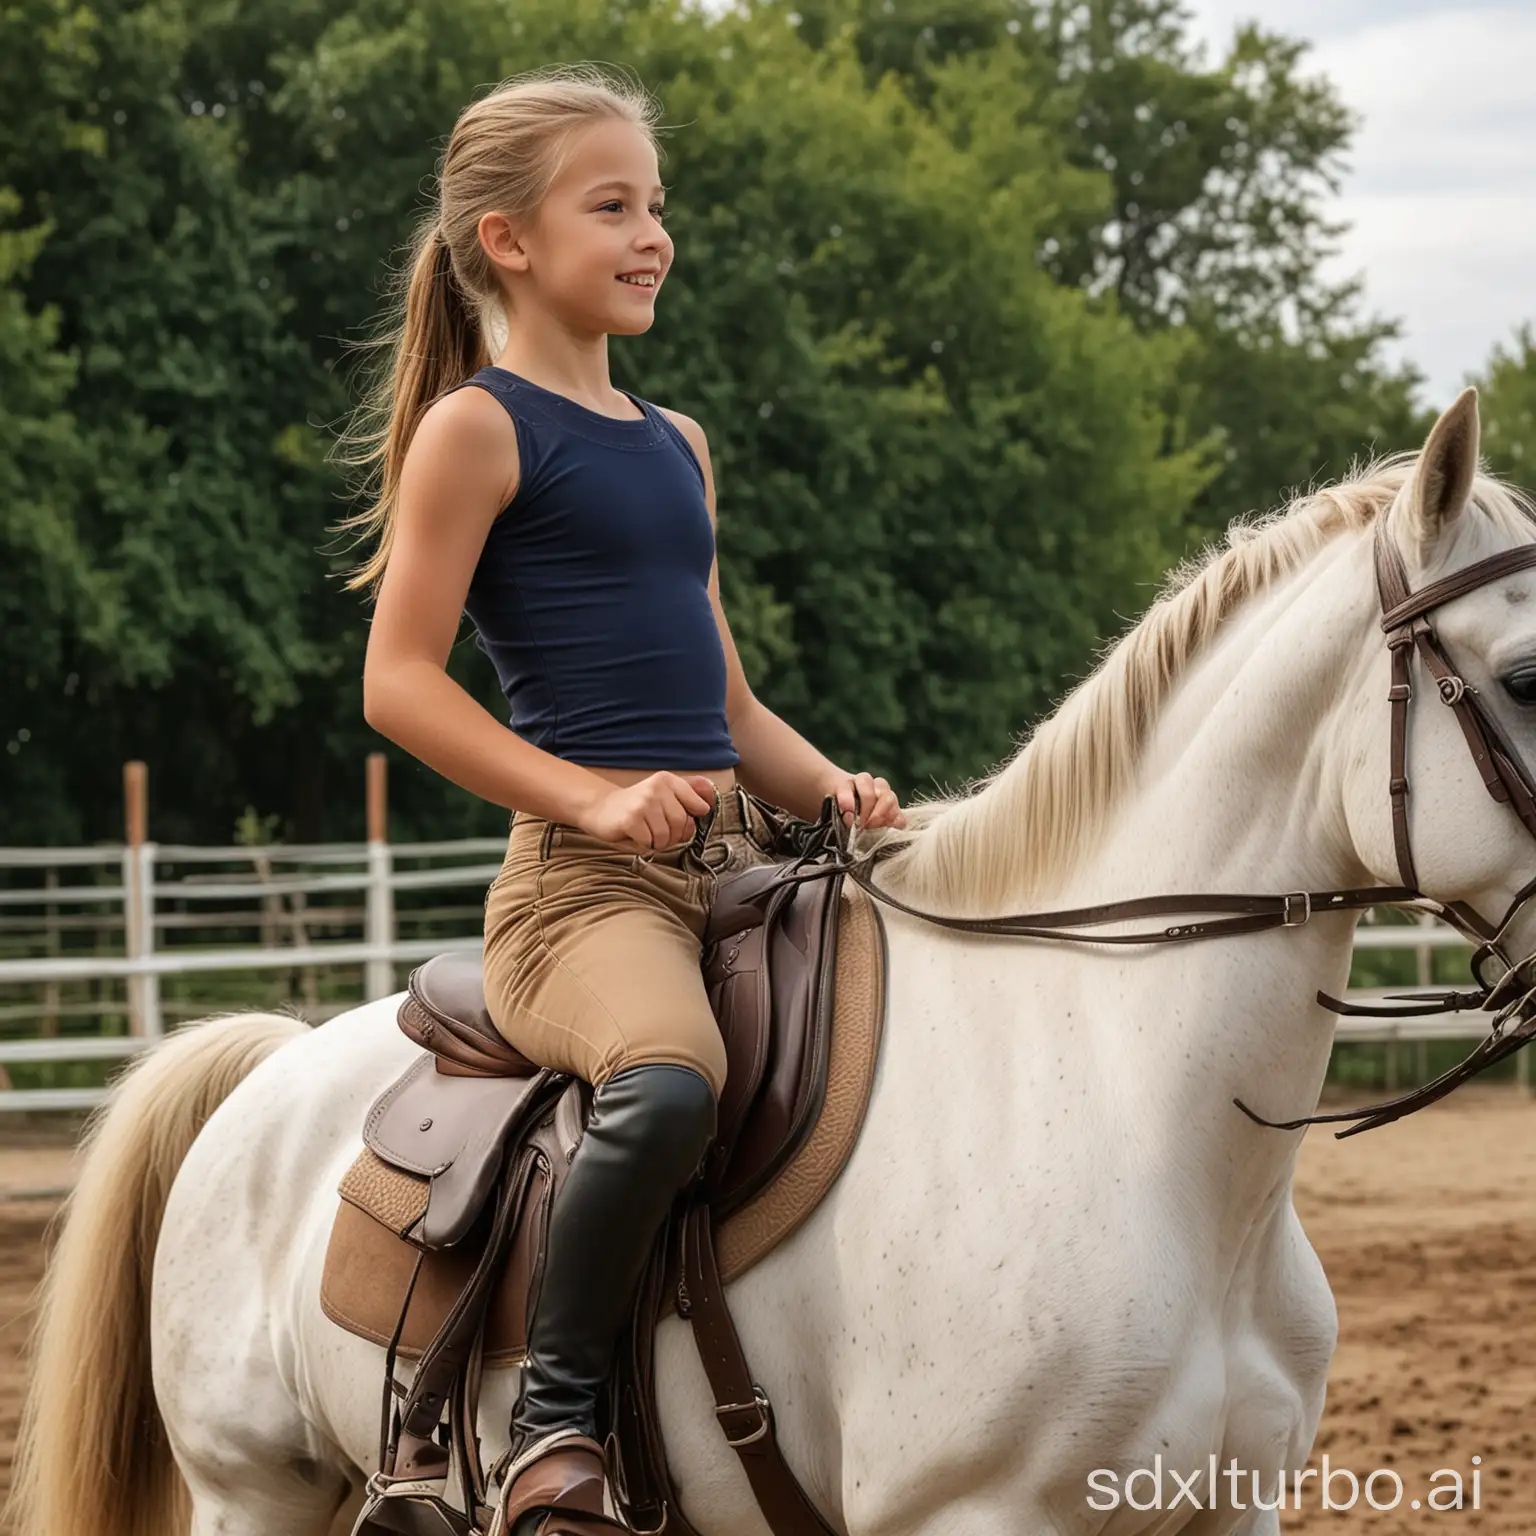 10 year old girl in crop top and tight jodhpurs riding bareback a horse astride. View from the side of the horse